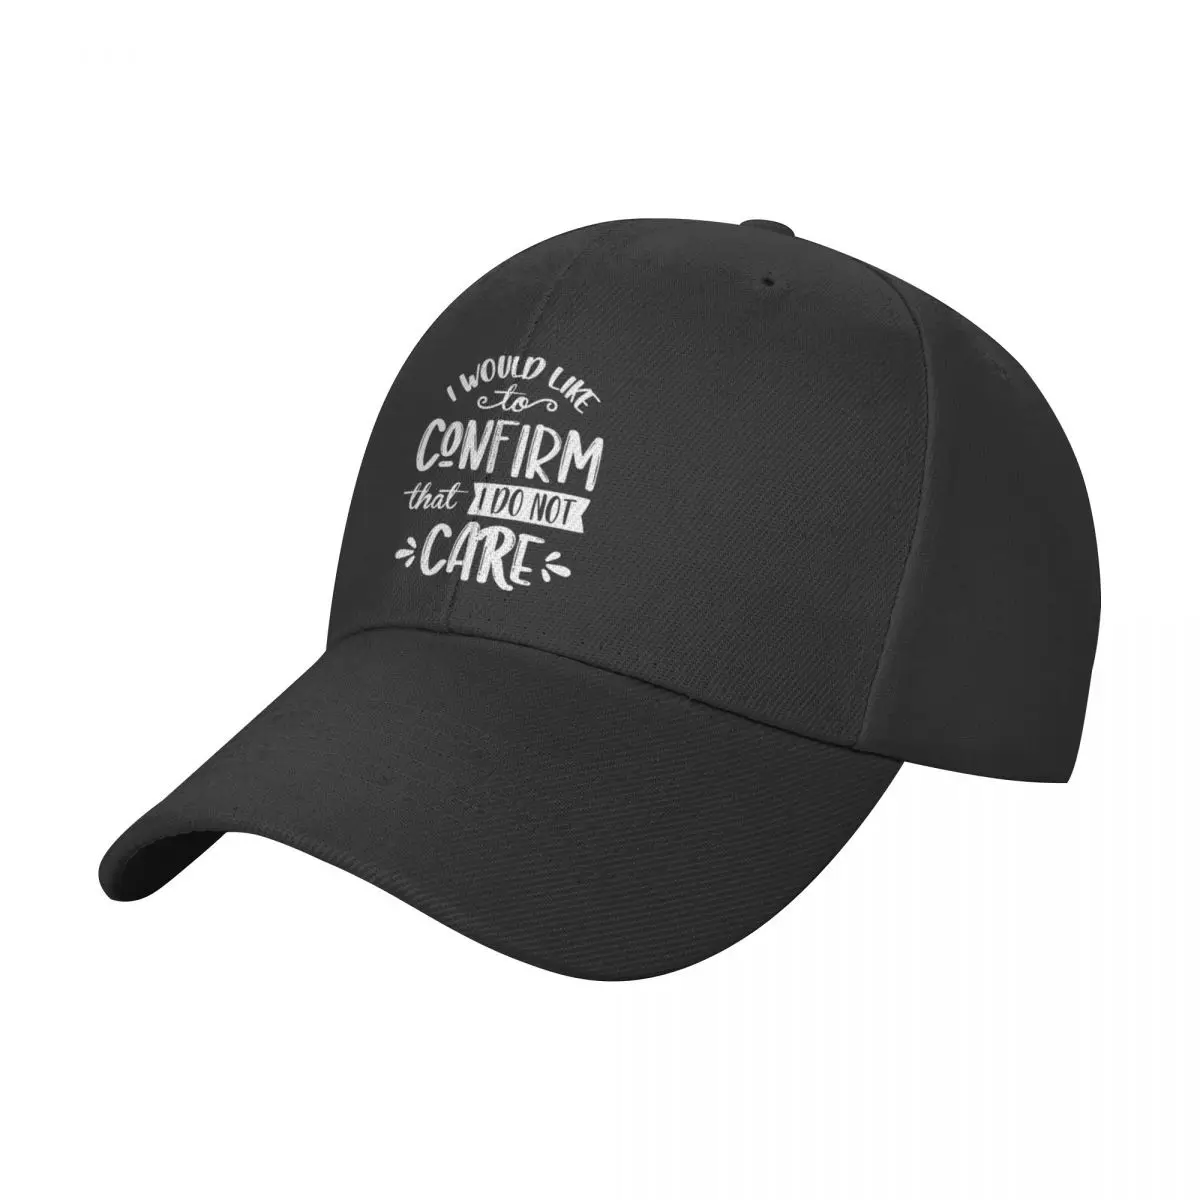 

I Would Like To Confirm That I Do Not Care - Funny Sarcastic Quotes Baseball Cap summer hat Men Caps Women's